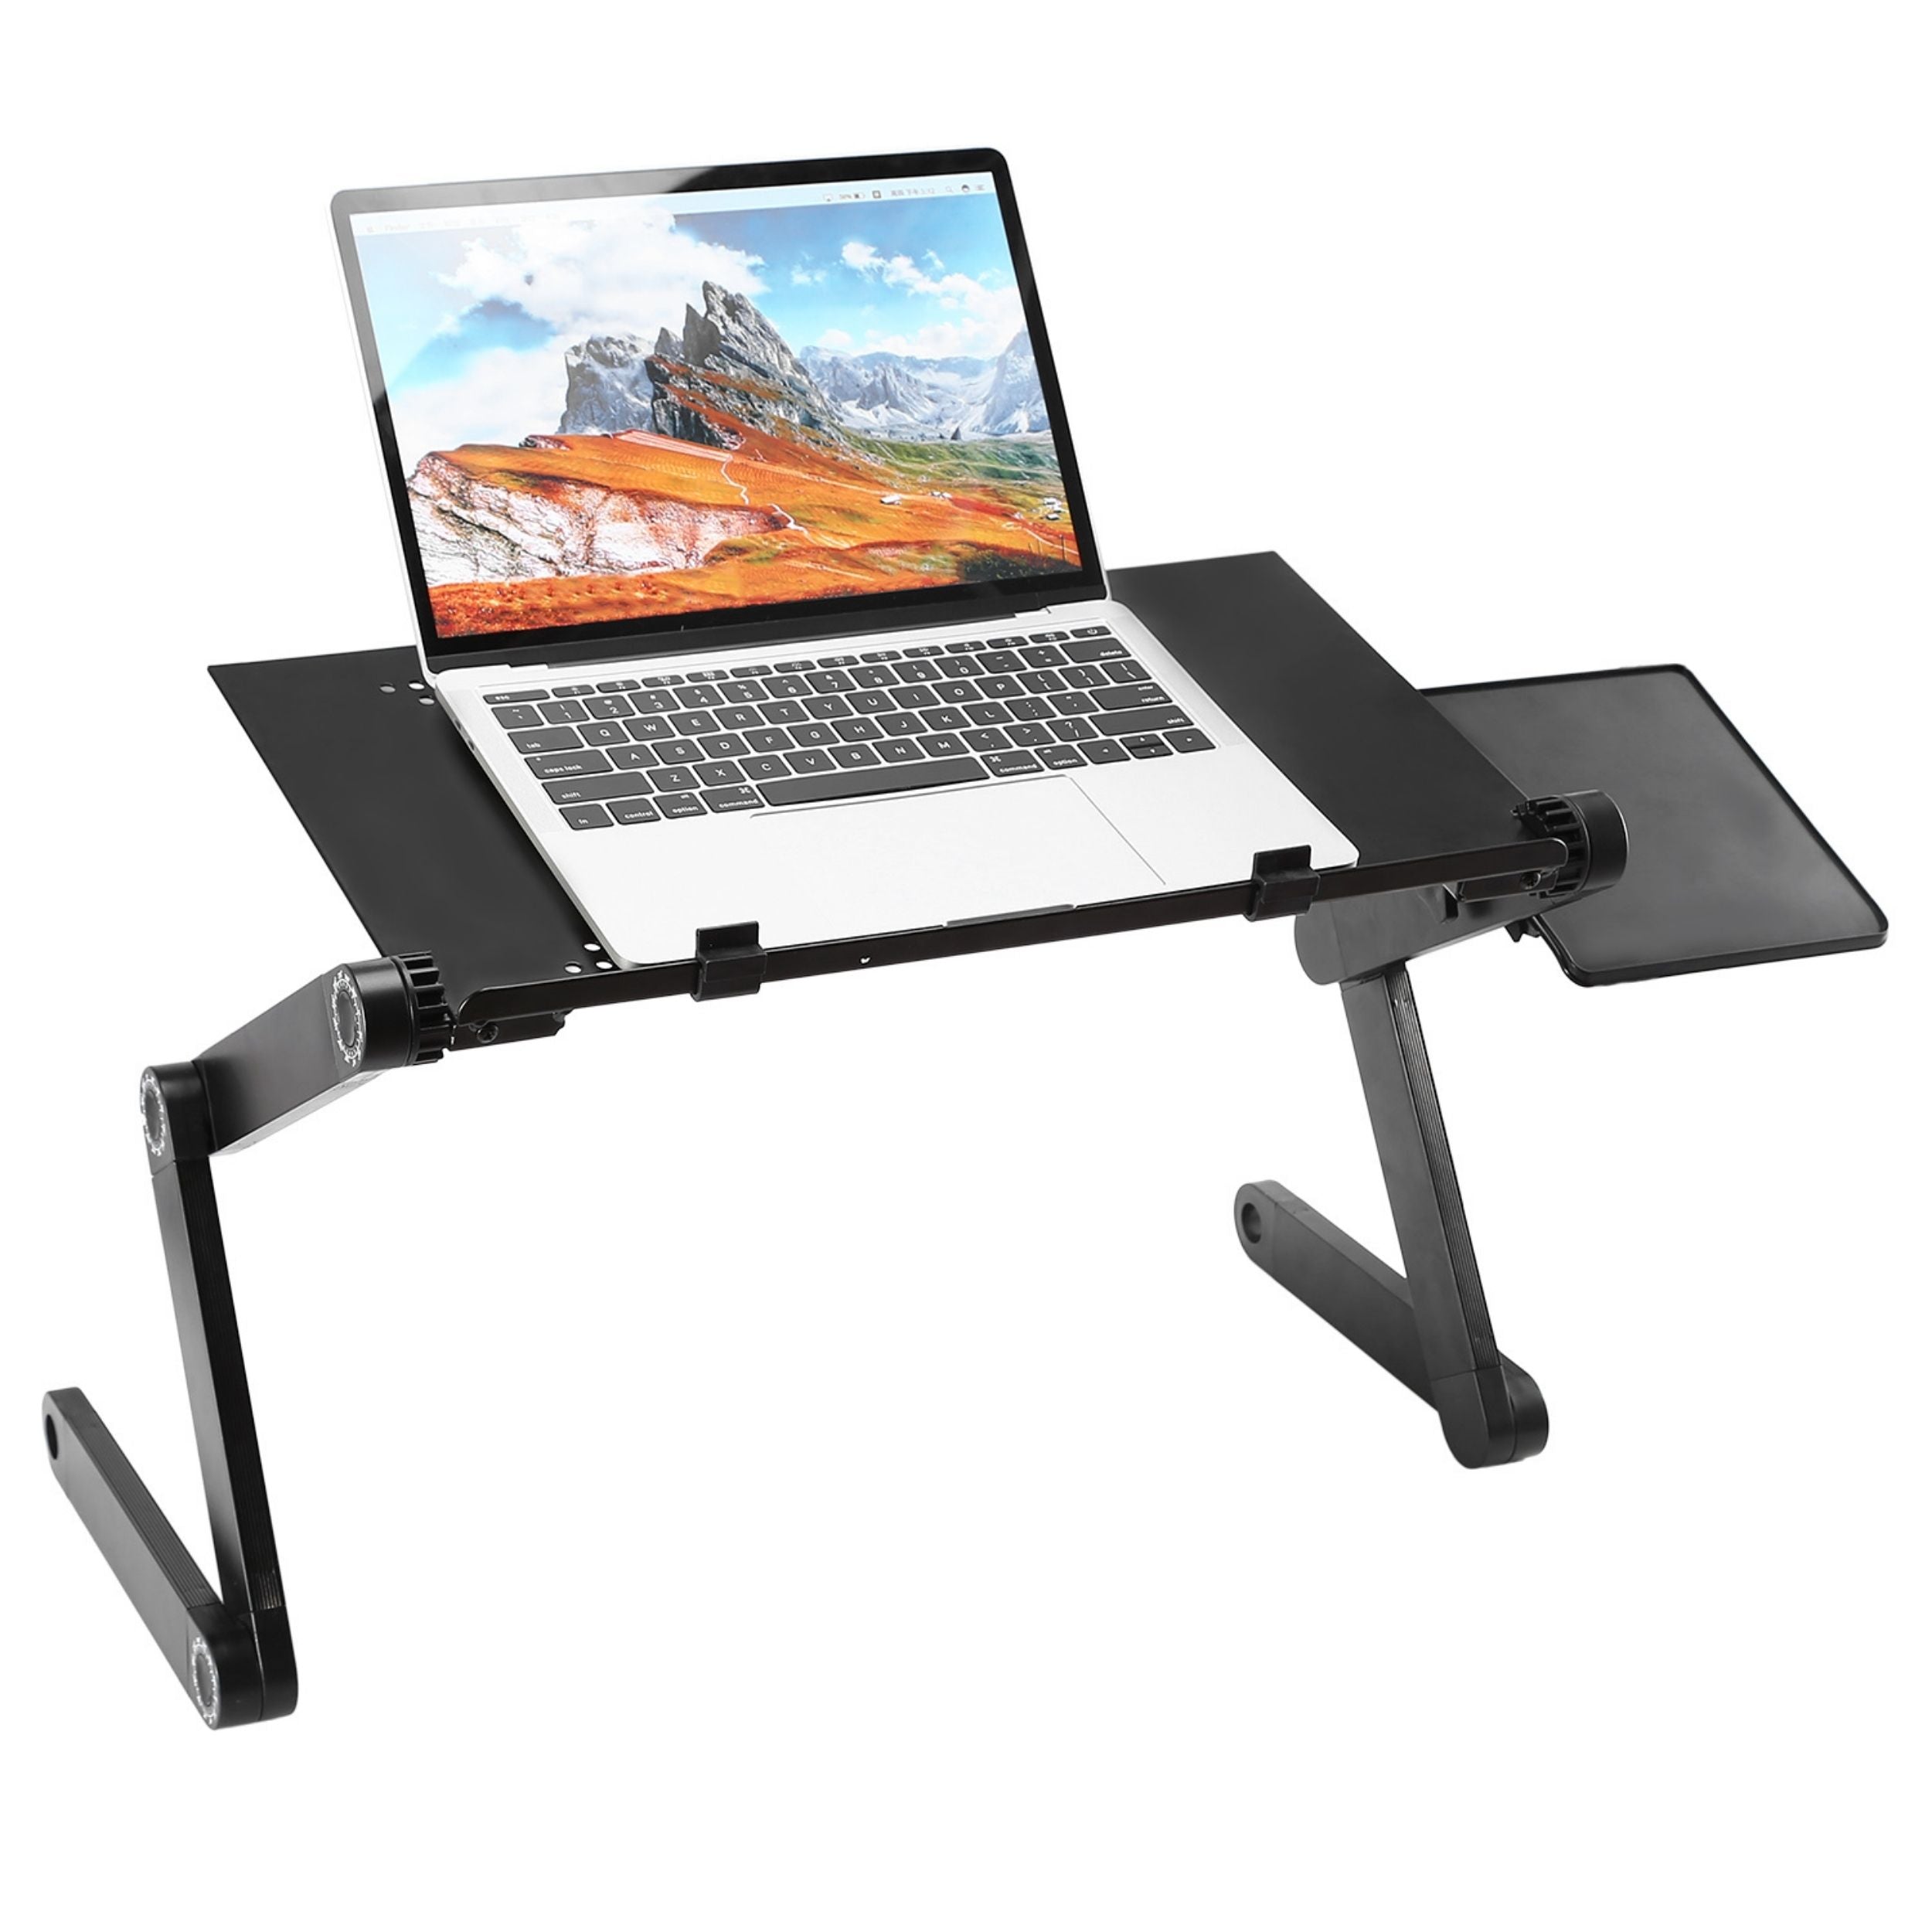 title:Foldable Laptop Table Bed Desk Aluminum Alloy Breakfast Tray w/ Mouse Board for Home Office Travel;color:Black